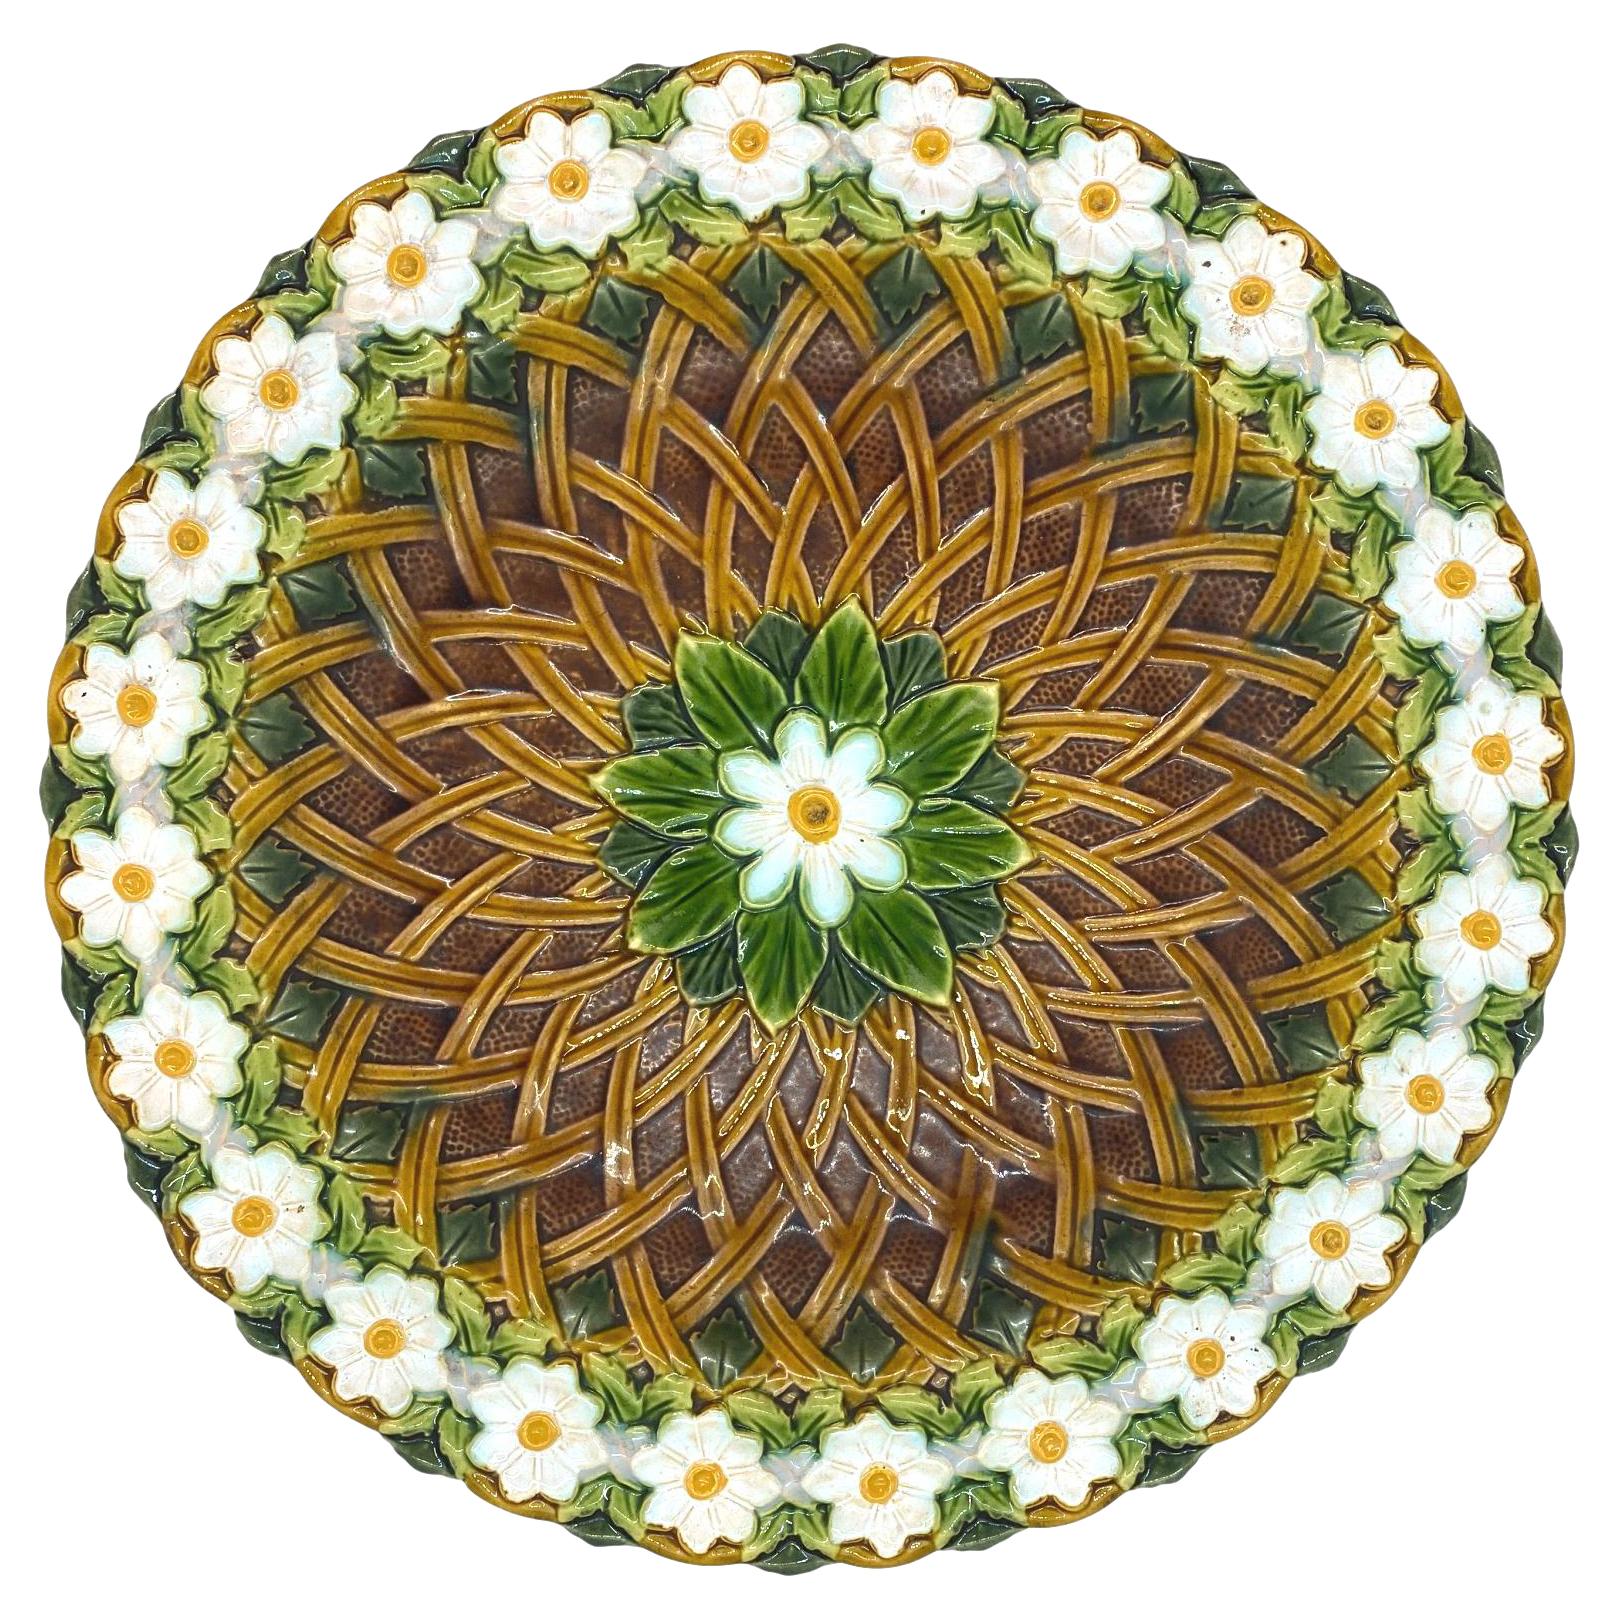 Minton Majolica Platter with Lattice Work and Daisy Chain Border, Dated 1880 For Sale